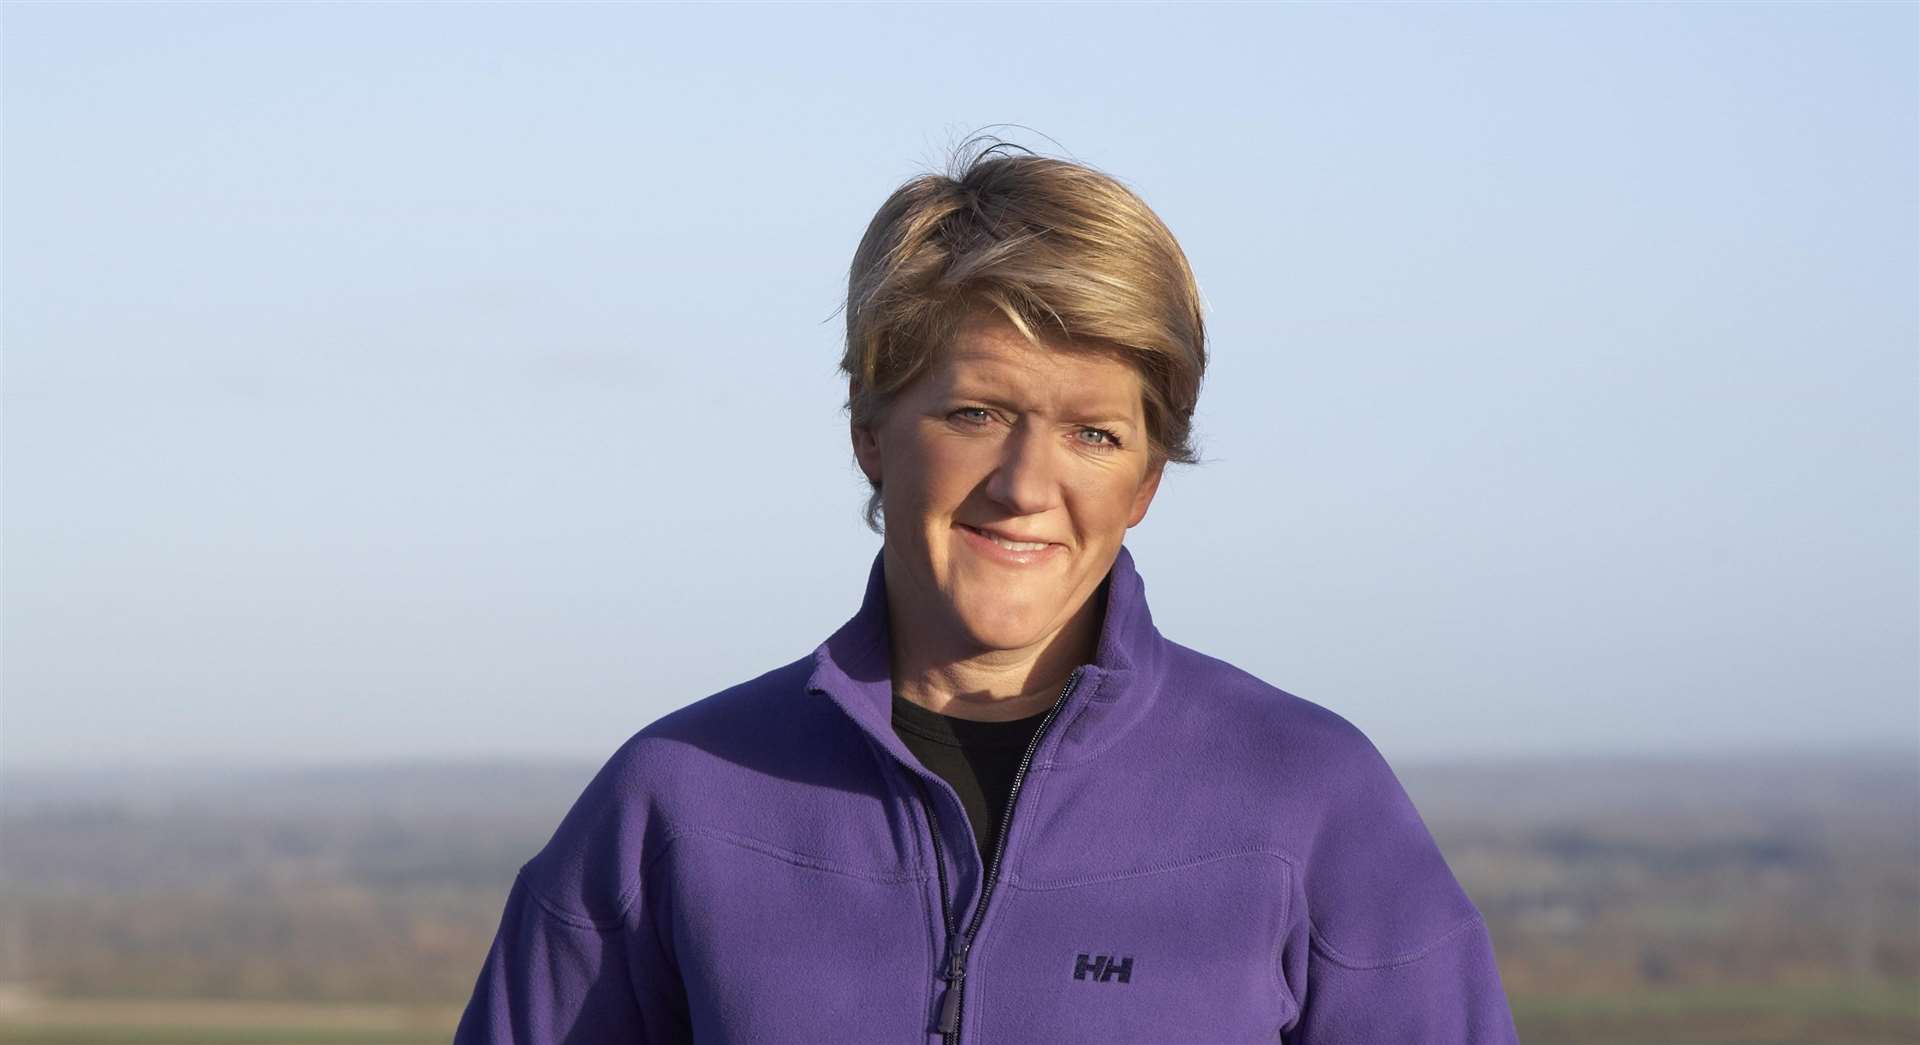 Clare Balding is part of the judging panel